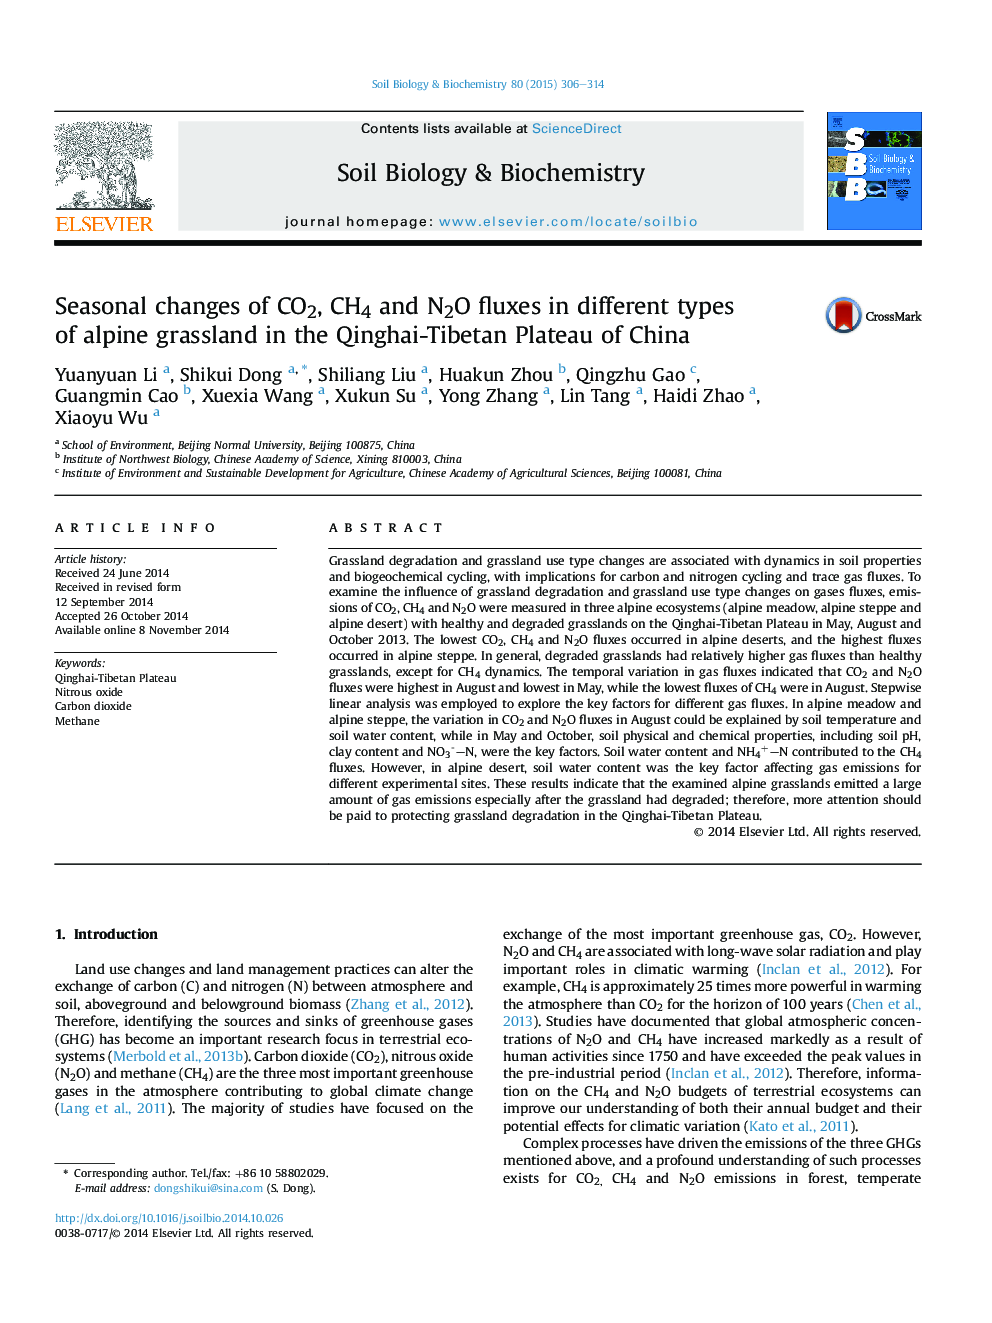 Seasonal changes of CO2, CH4 and N2O fluxes in different types of alpine grassland in the Qinghai-Tibetan Plateau of China